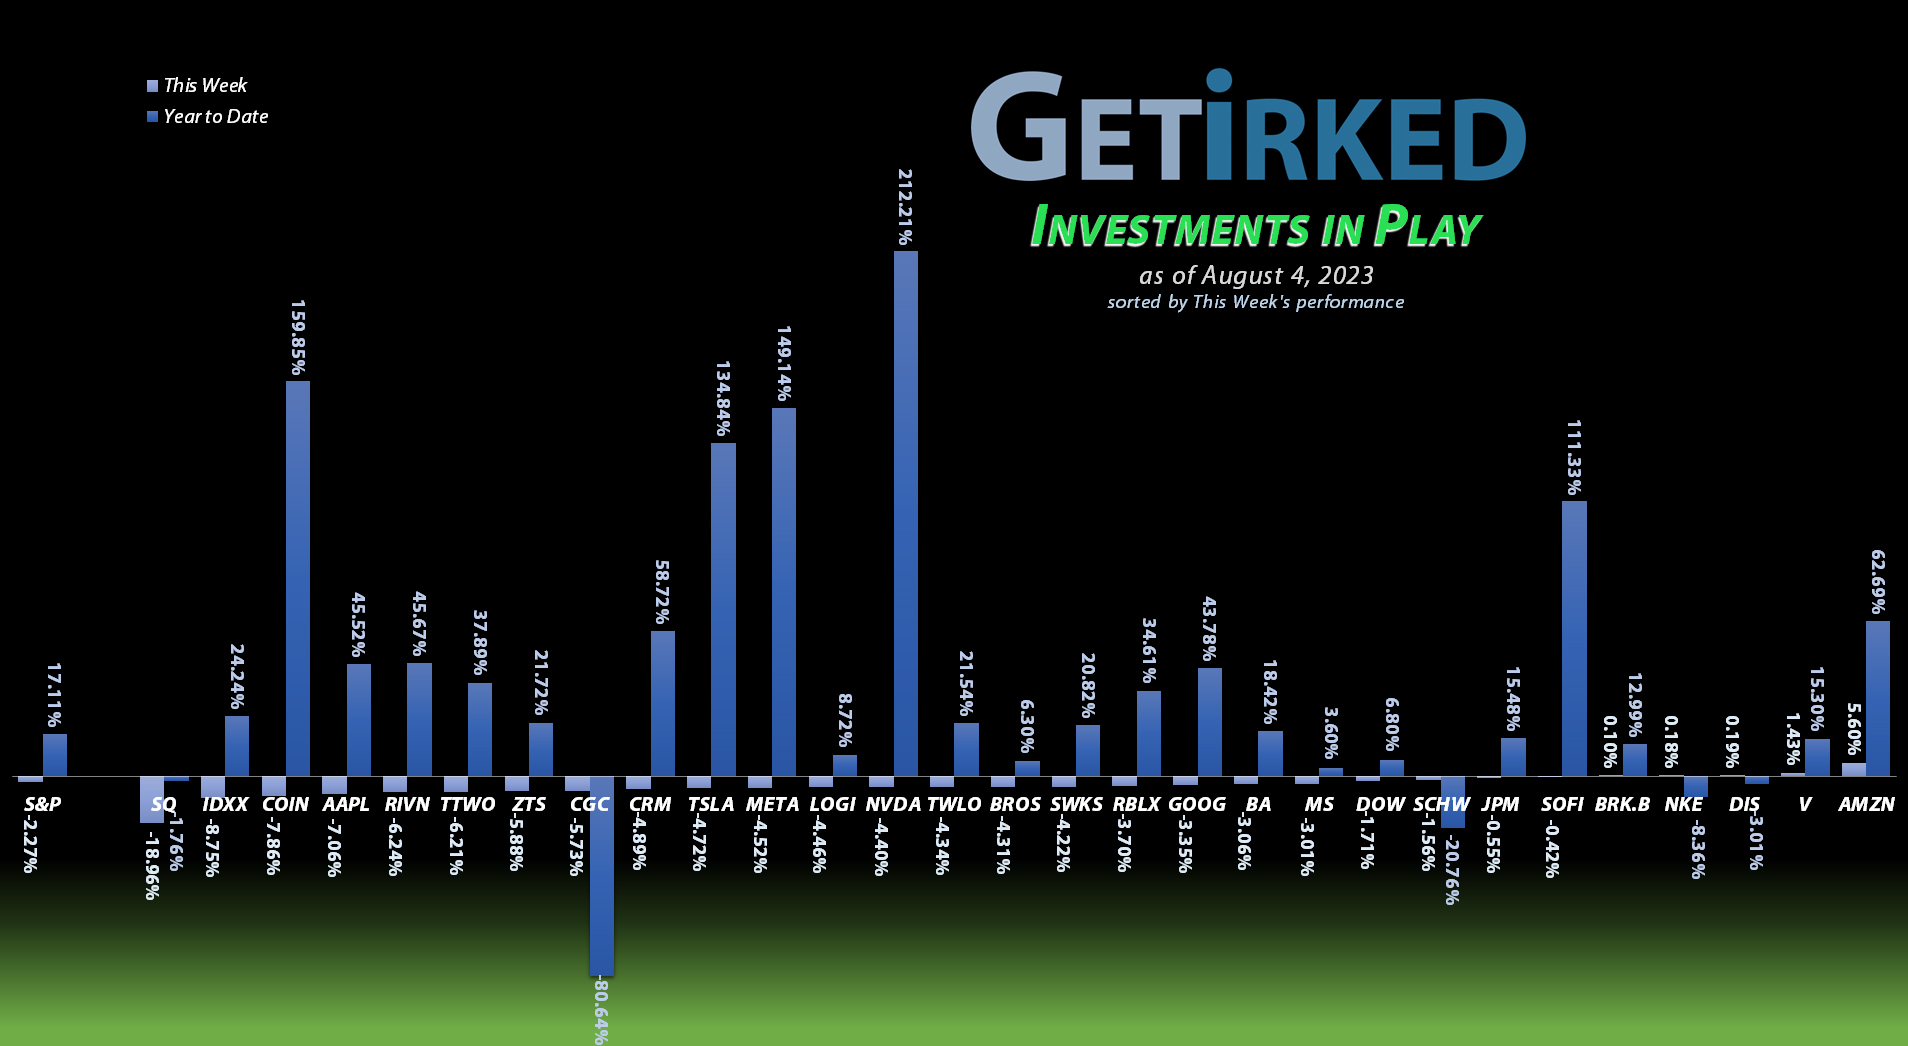 Get Irked's Investments in Play - August 4, 2023